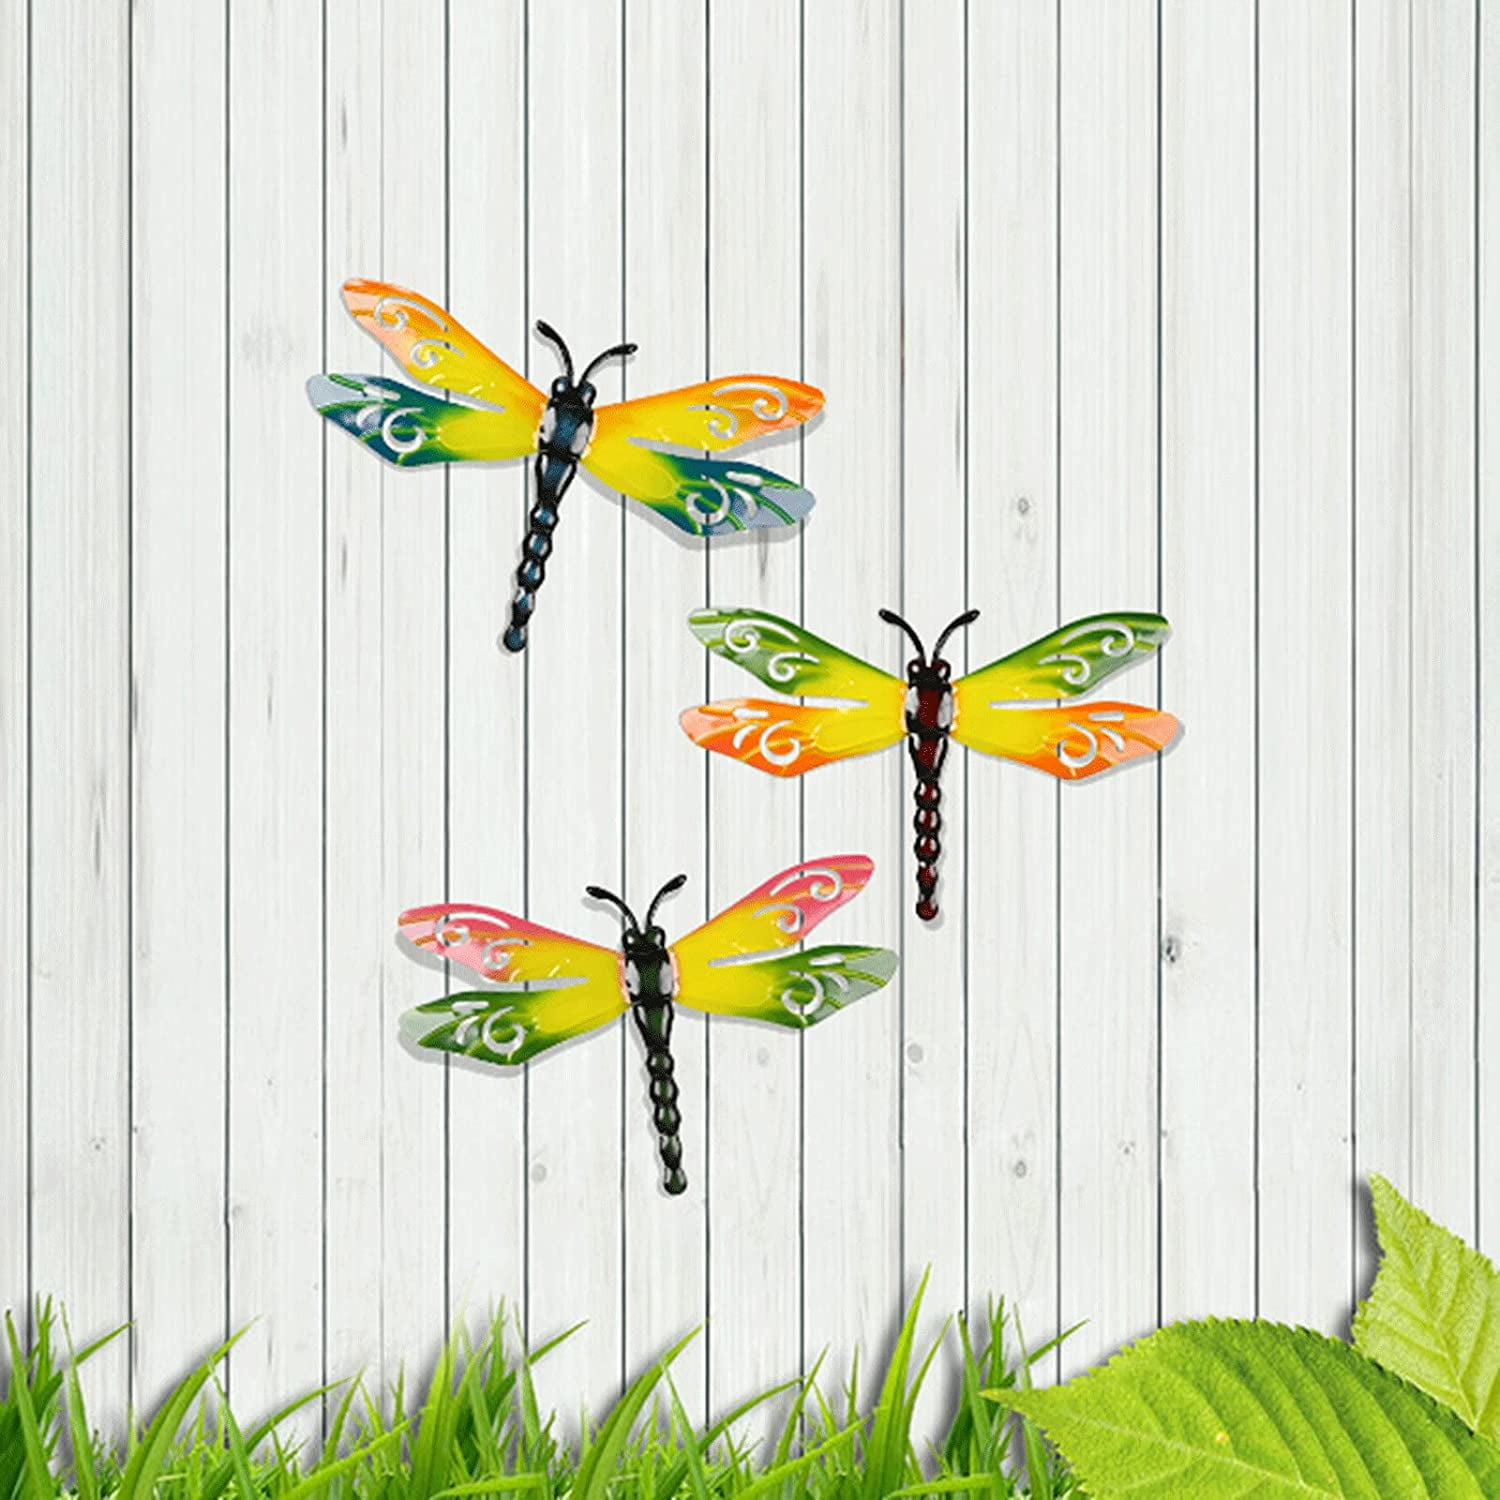 Metal Dragonfly Wall Decor Outdoor Garden Fence Art,Hanging Decorations for 